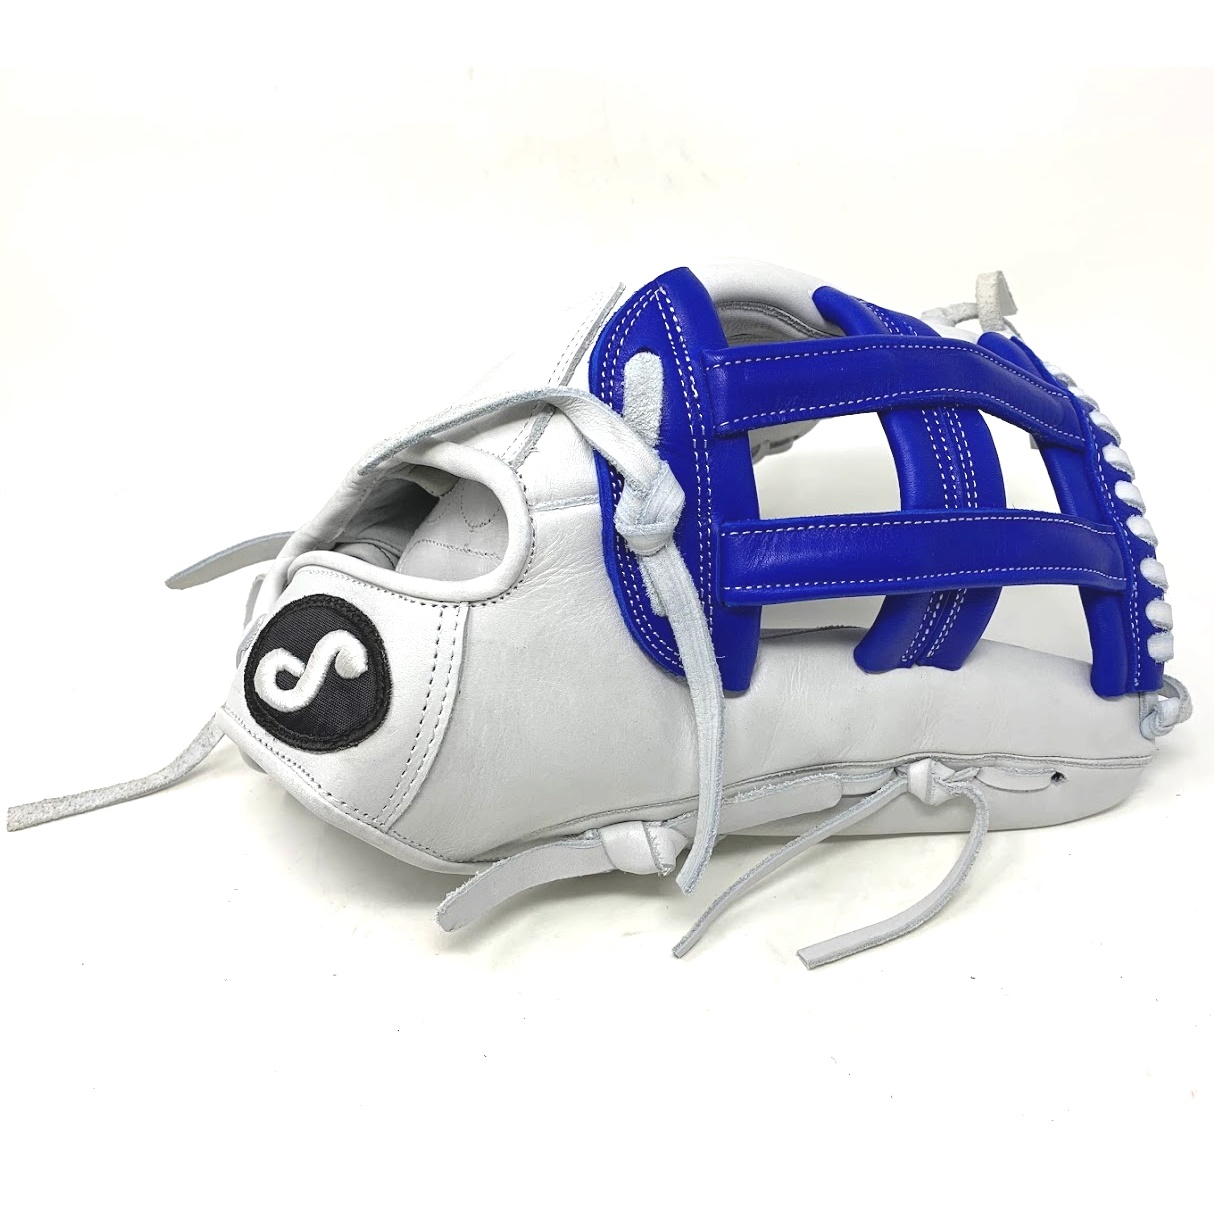 soto-white-14-inch-h-web-slow-pitch-softball-glove-right-hand-throw SS20-14-WHRY-H-RightHandThrow soto  <p><strong><span style=font-size medium;>Made in Mexico</span></strong>   <img class=__mce_add_custom__ title=mexico-flag-50.jpg src=  